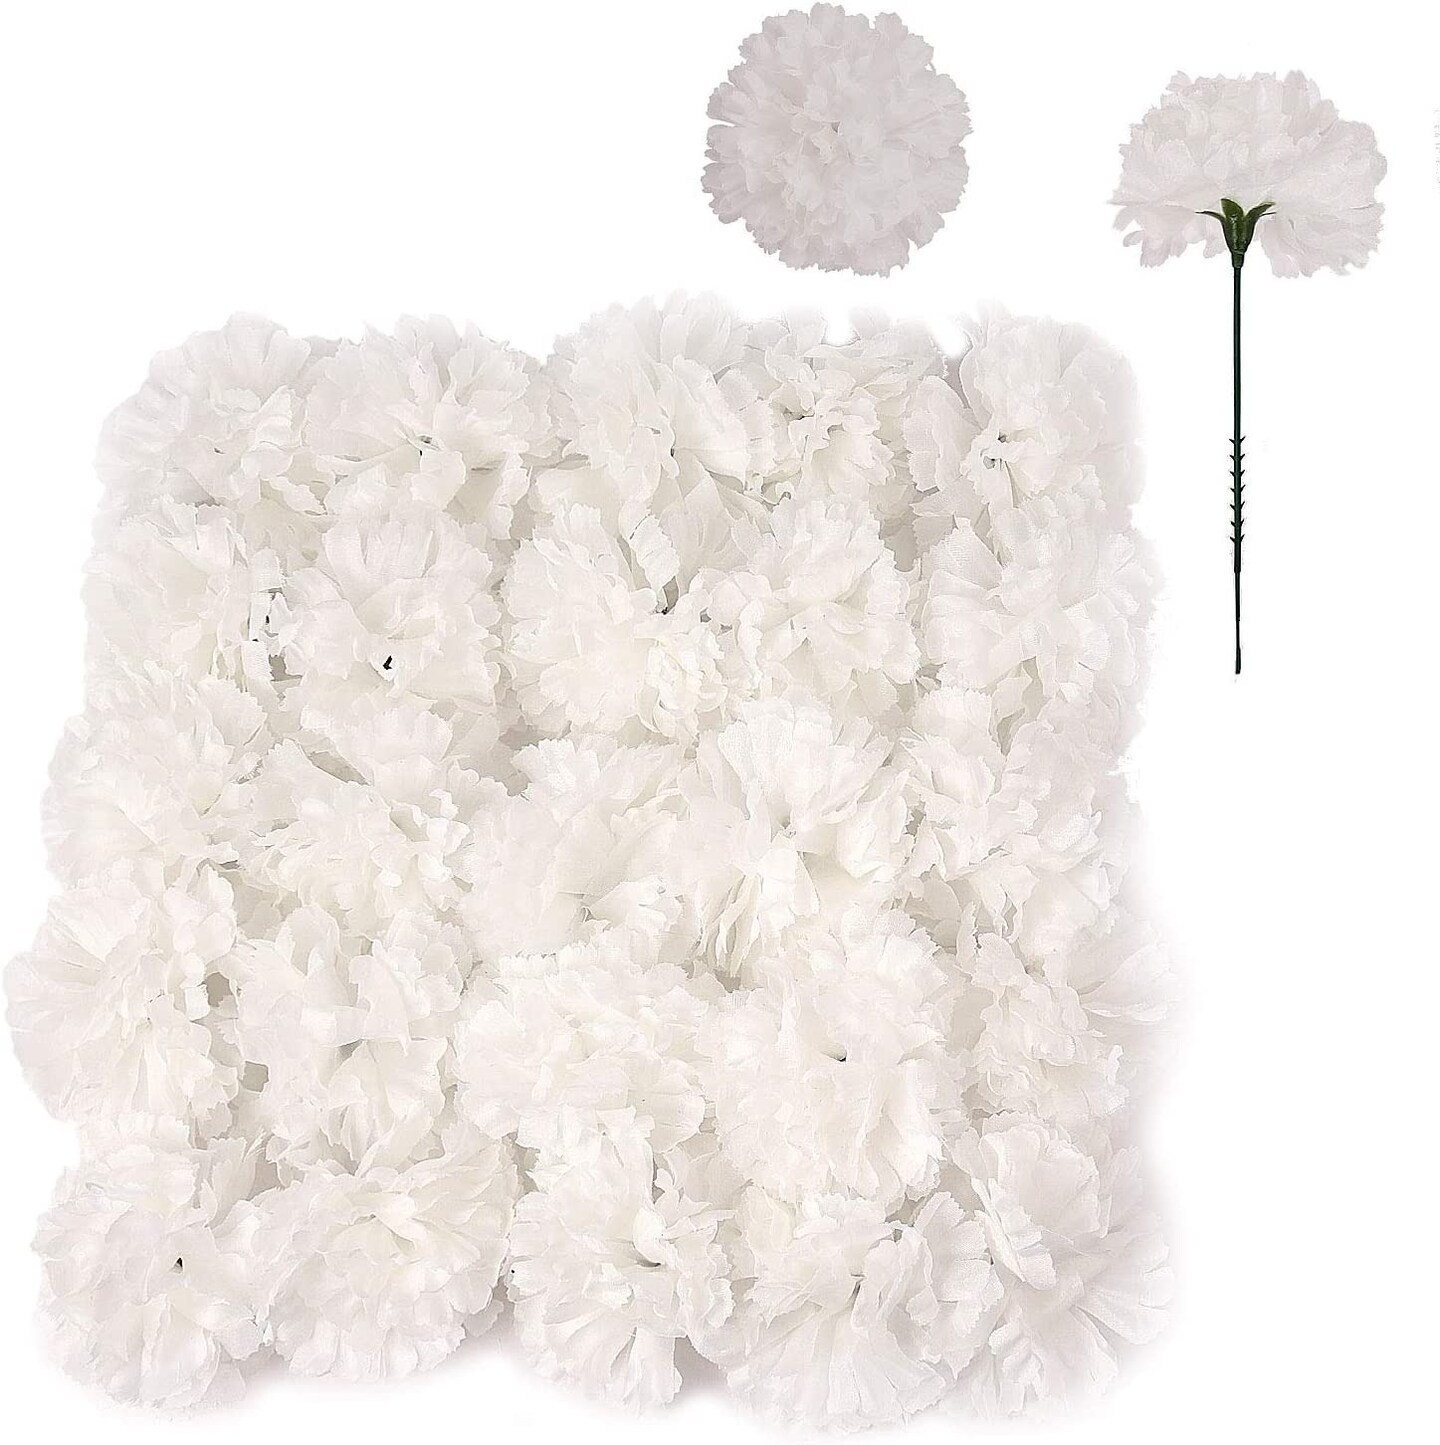 Floral Home White Carnation Flowers, 100-Pack, Artificial Carnation Picks, Silk Fake Carnations, Bulk, for DIY Wedding, Bouquets, Party, &#x26; Event, Home Decor